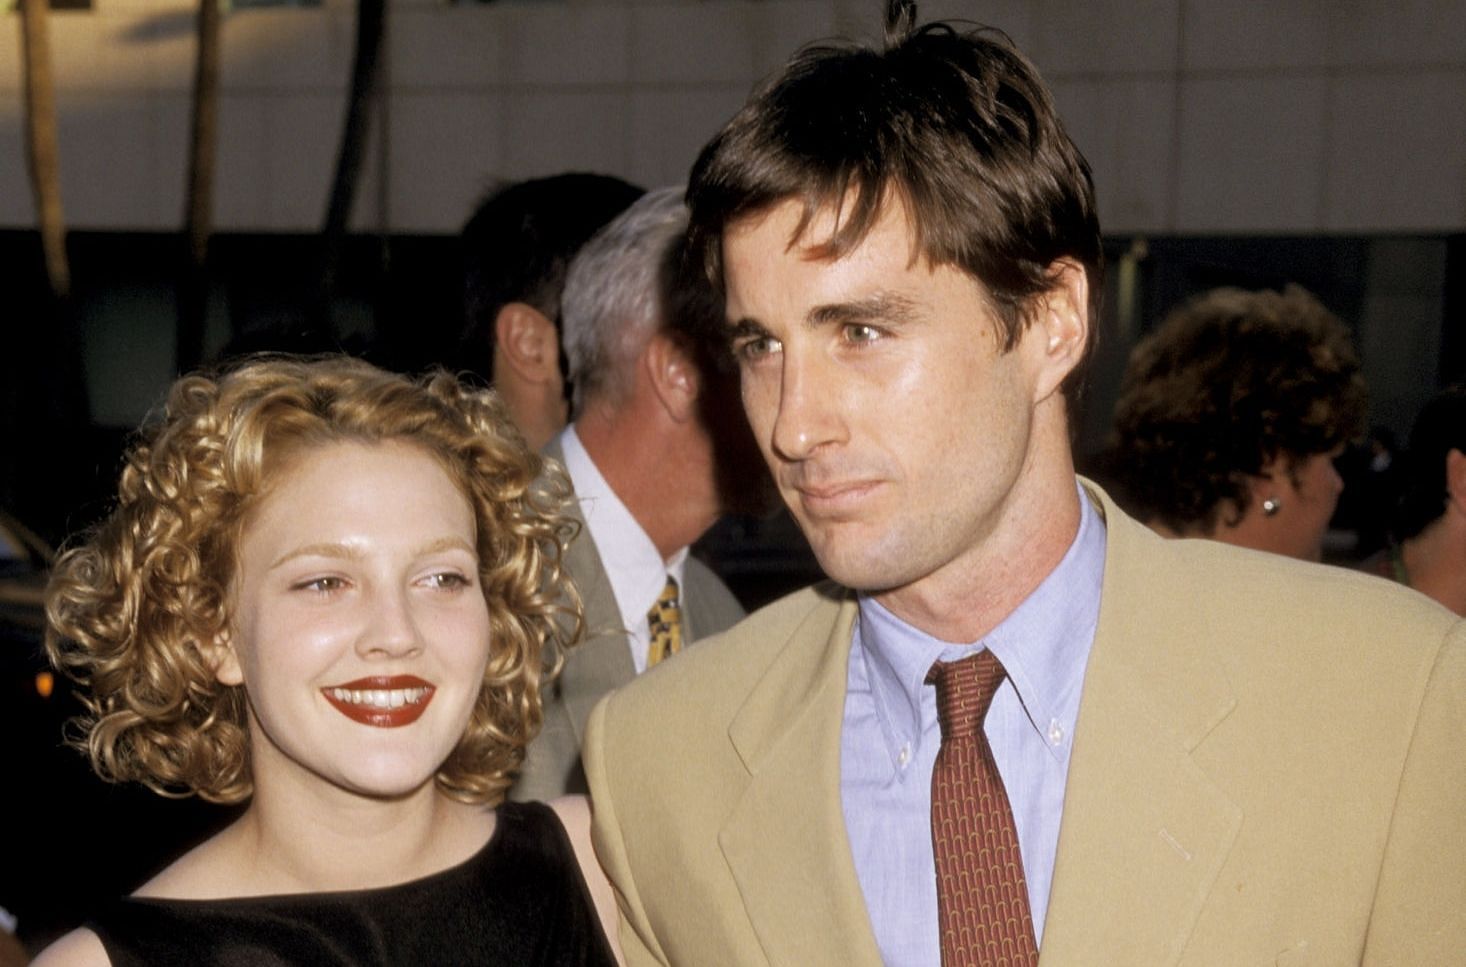 Drew Barrymore and Luke Wilson dated between 1997 and 1999 (Image via Ron Galella/Getty Images)